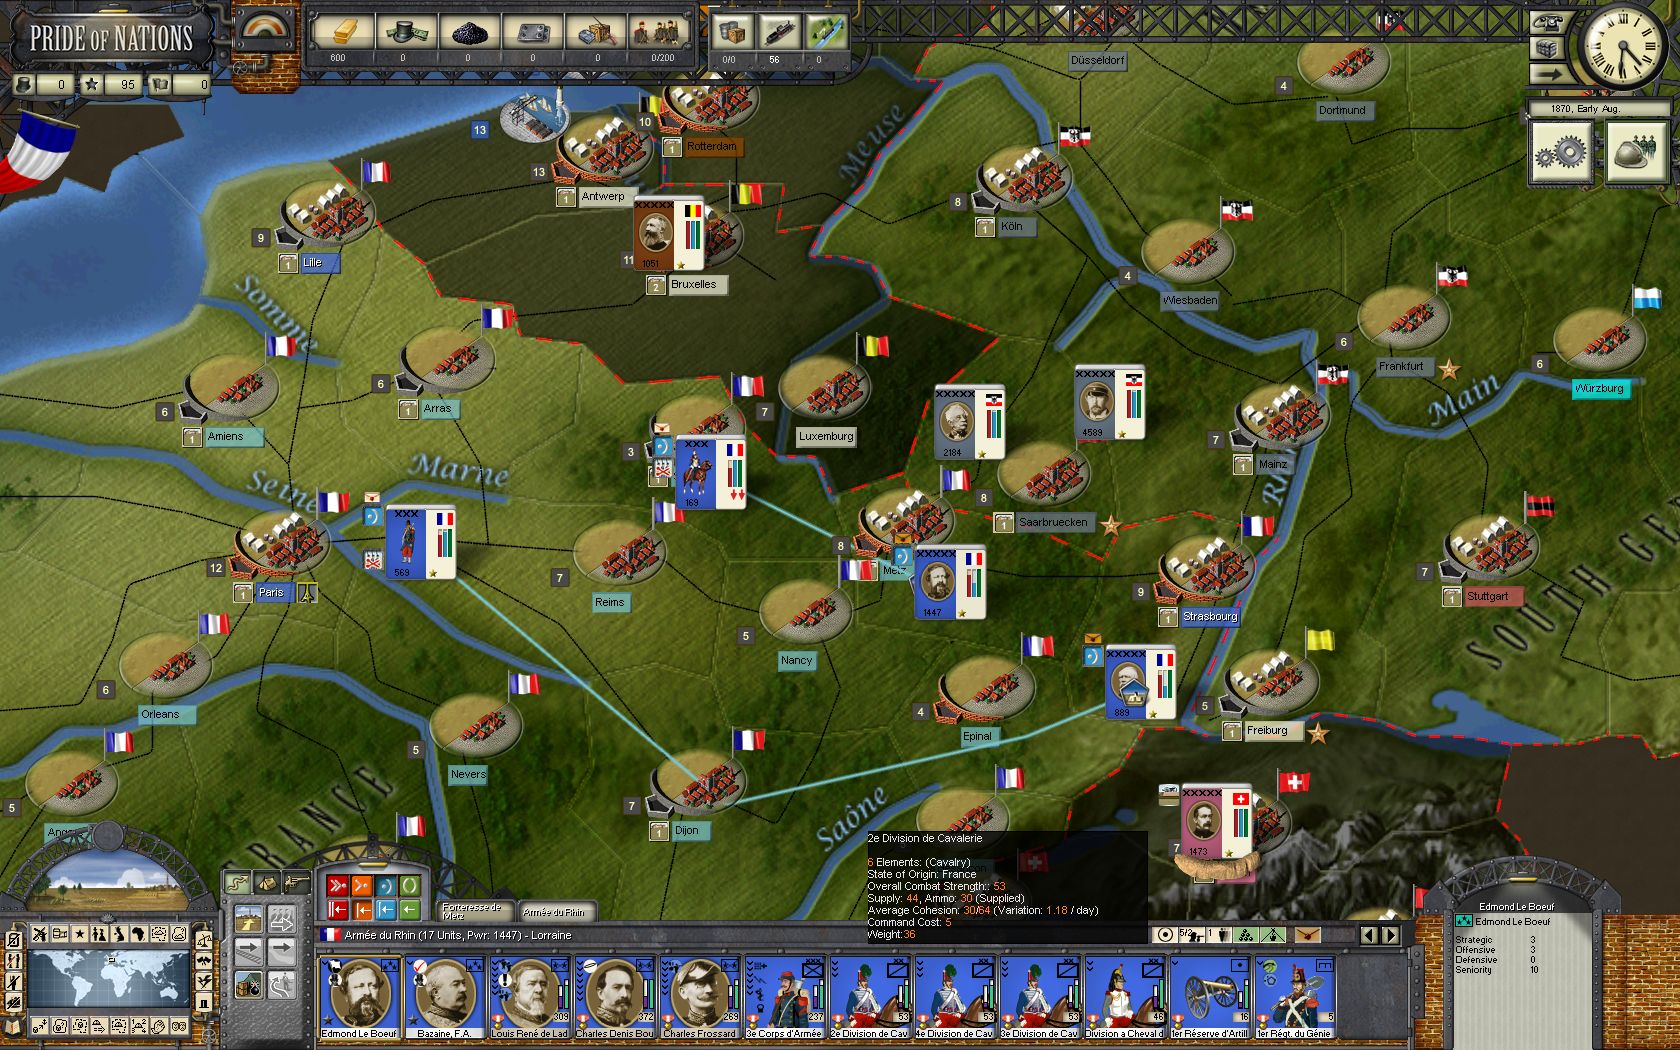 Pride of Nations - The Franco-Prussian War 1870 DLC Steam CD Key 4.38$